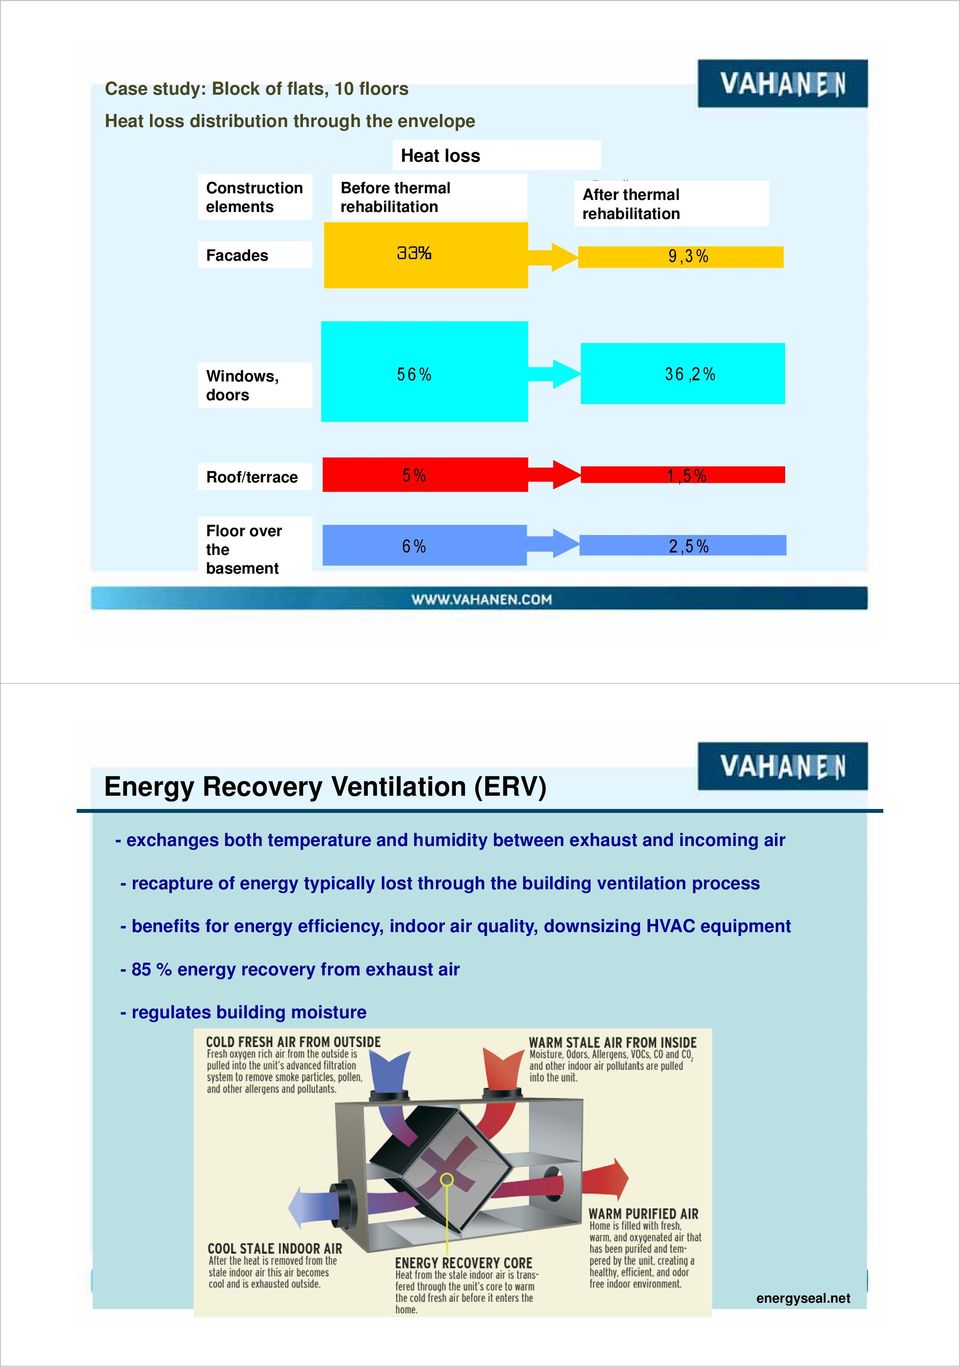 the peste subsol basement 5% 1,5% 6% 2,5% Energy Recovery Ventilation (ERV) - exchanges both temperature and humidity between exhaust and incoming air - recapture of energy typically lost